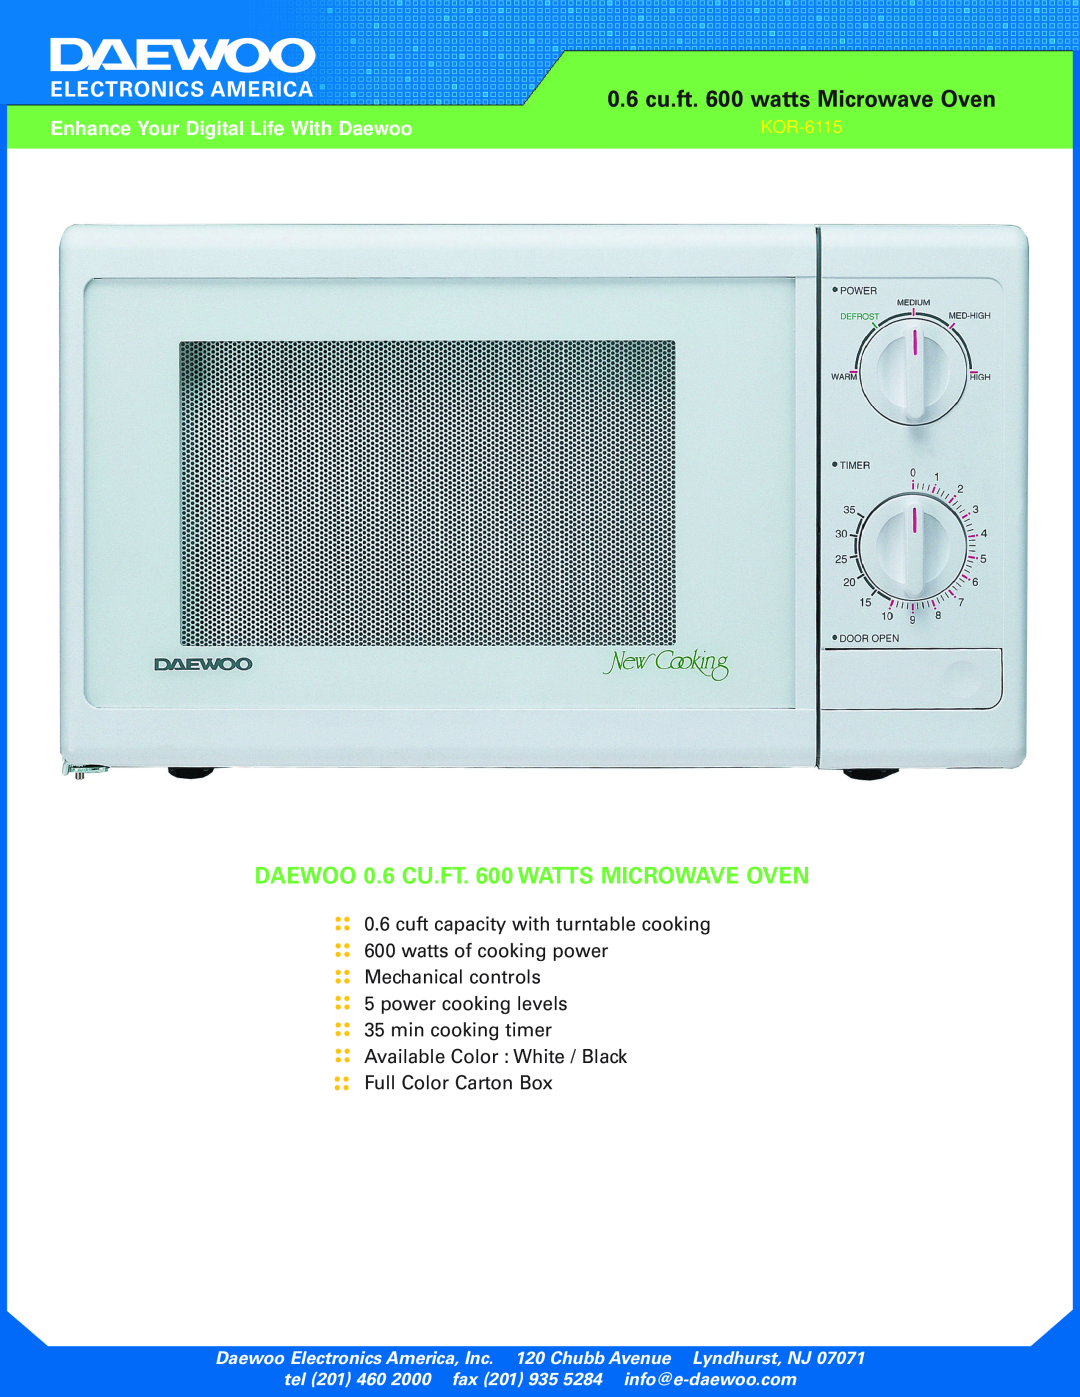 Daewoo KOR-6115 manual Electronics America, cuft capacity with turntable cooking 600 watts of cooking power 